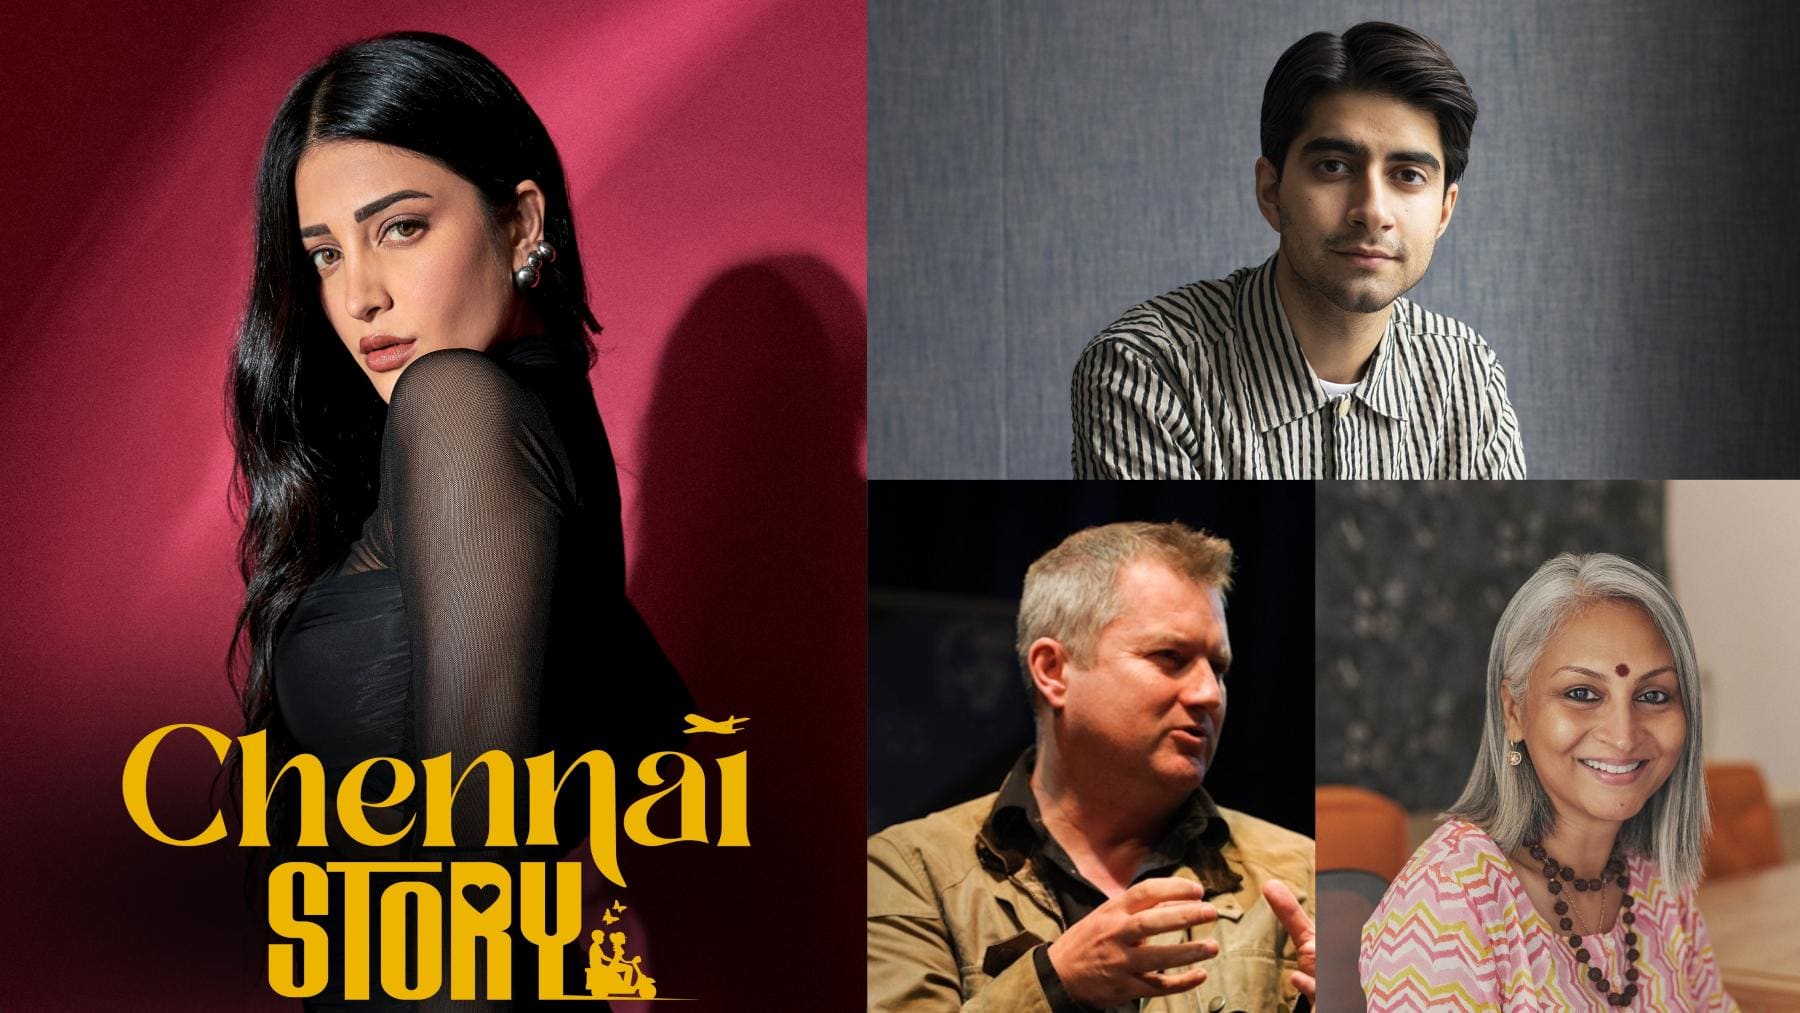 Chennai Story: Shruti Haasan and Viveik Kalra join forces for multicultural love story